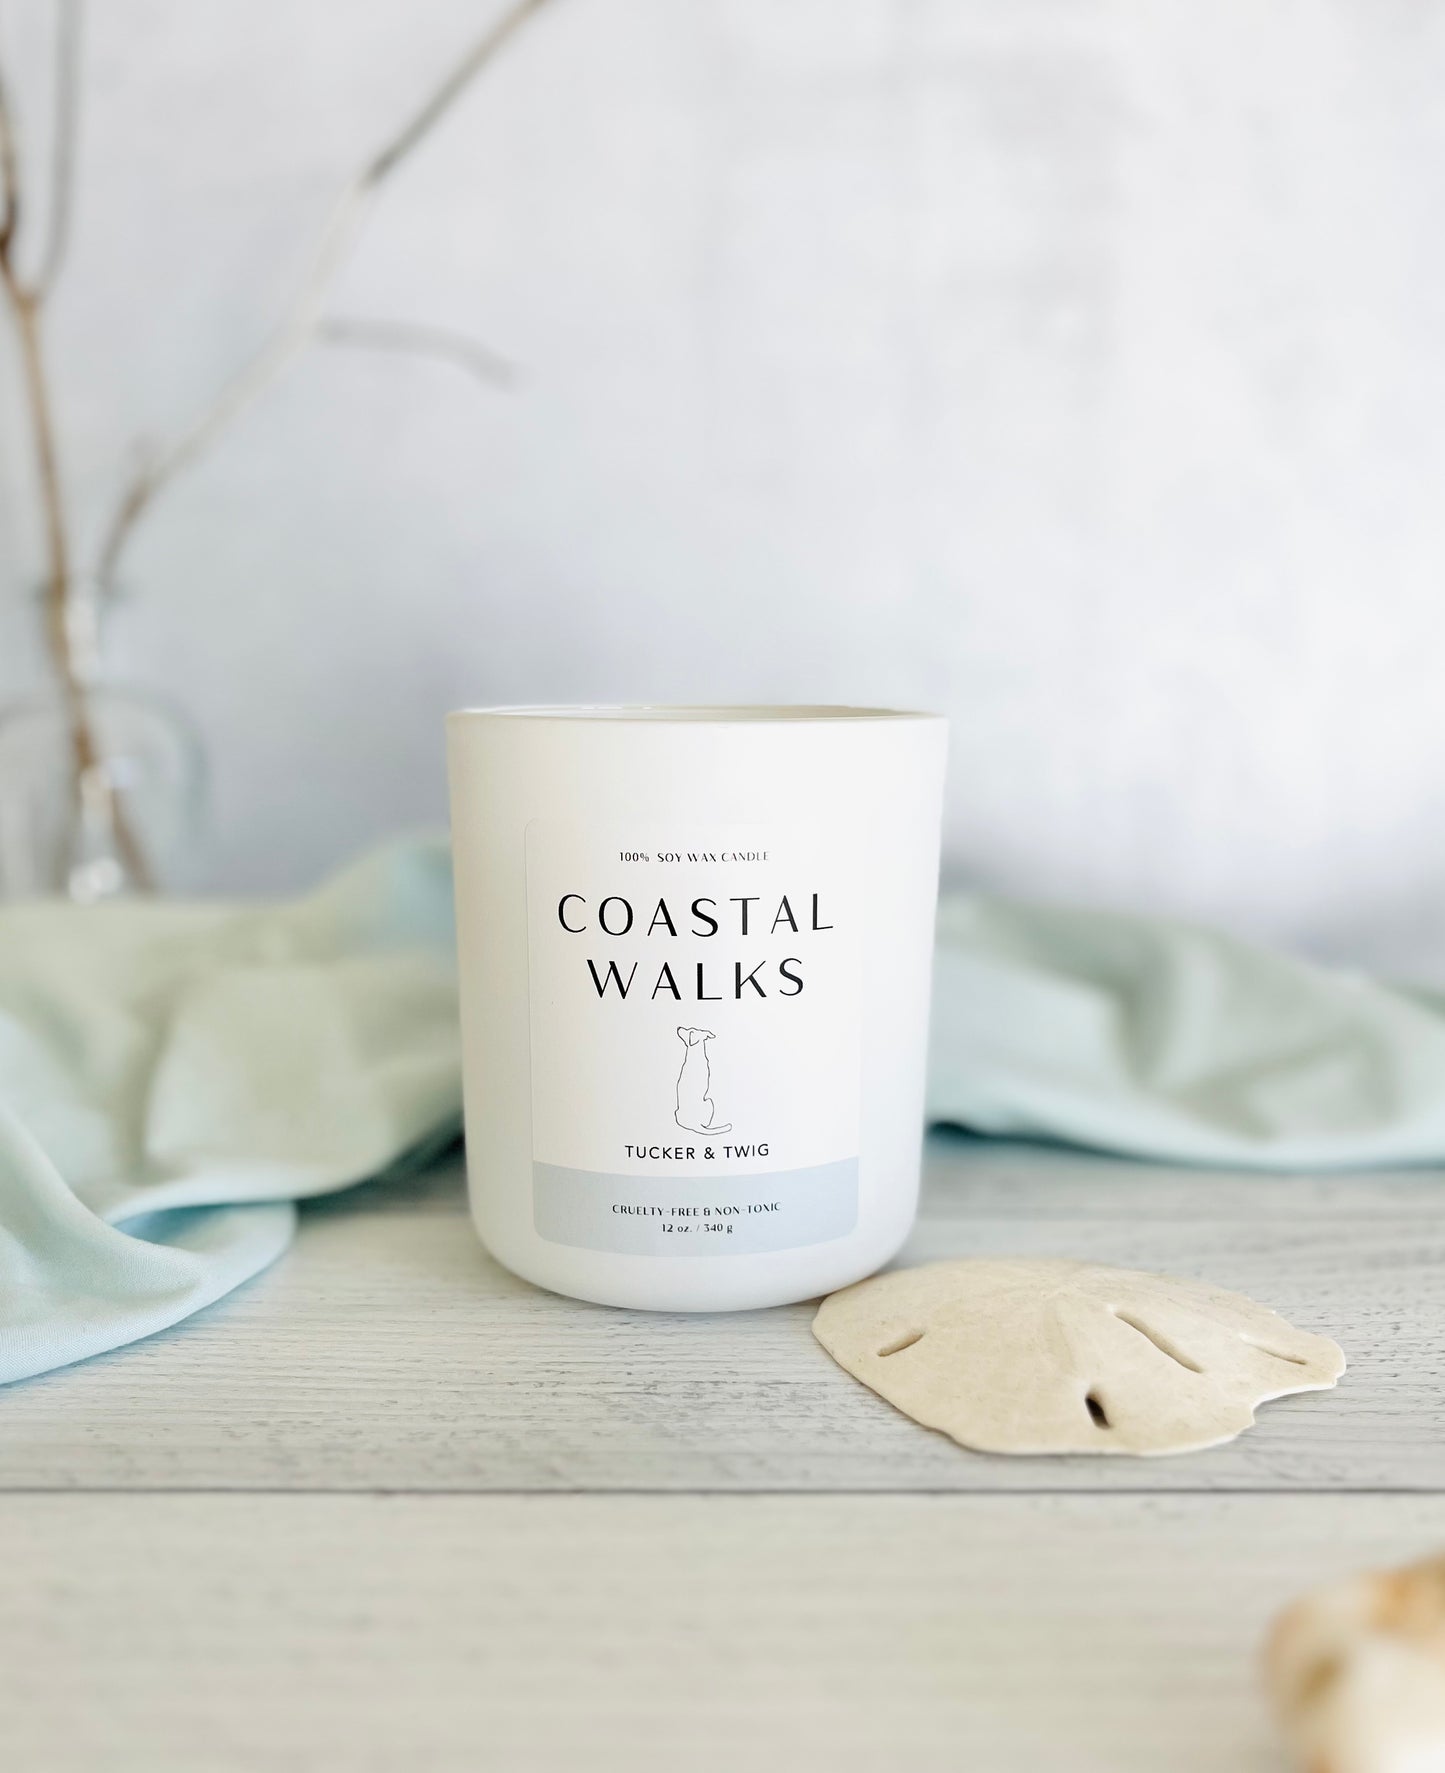 Candle in white glass container, labeled "Coastal Walks" with sand dollar beside it.